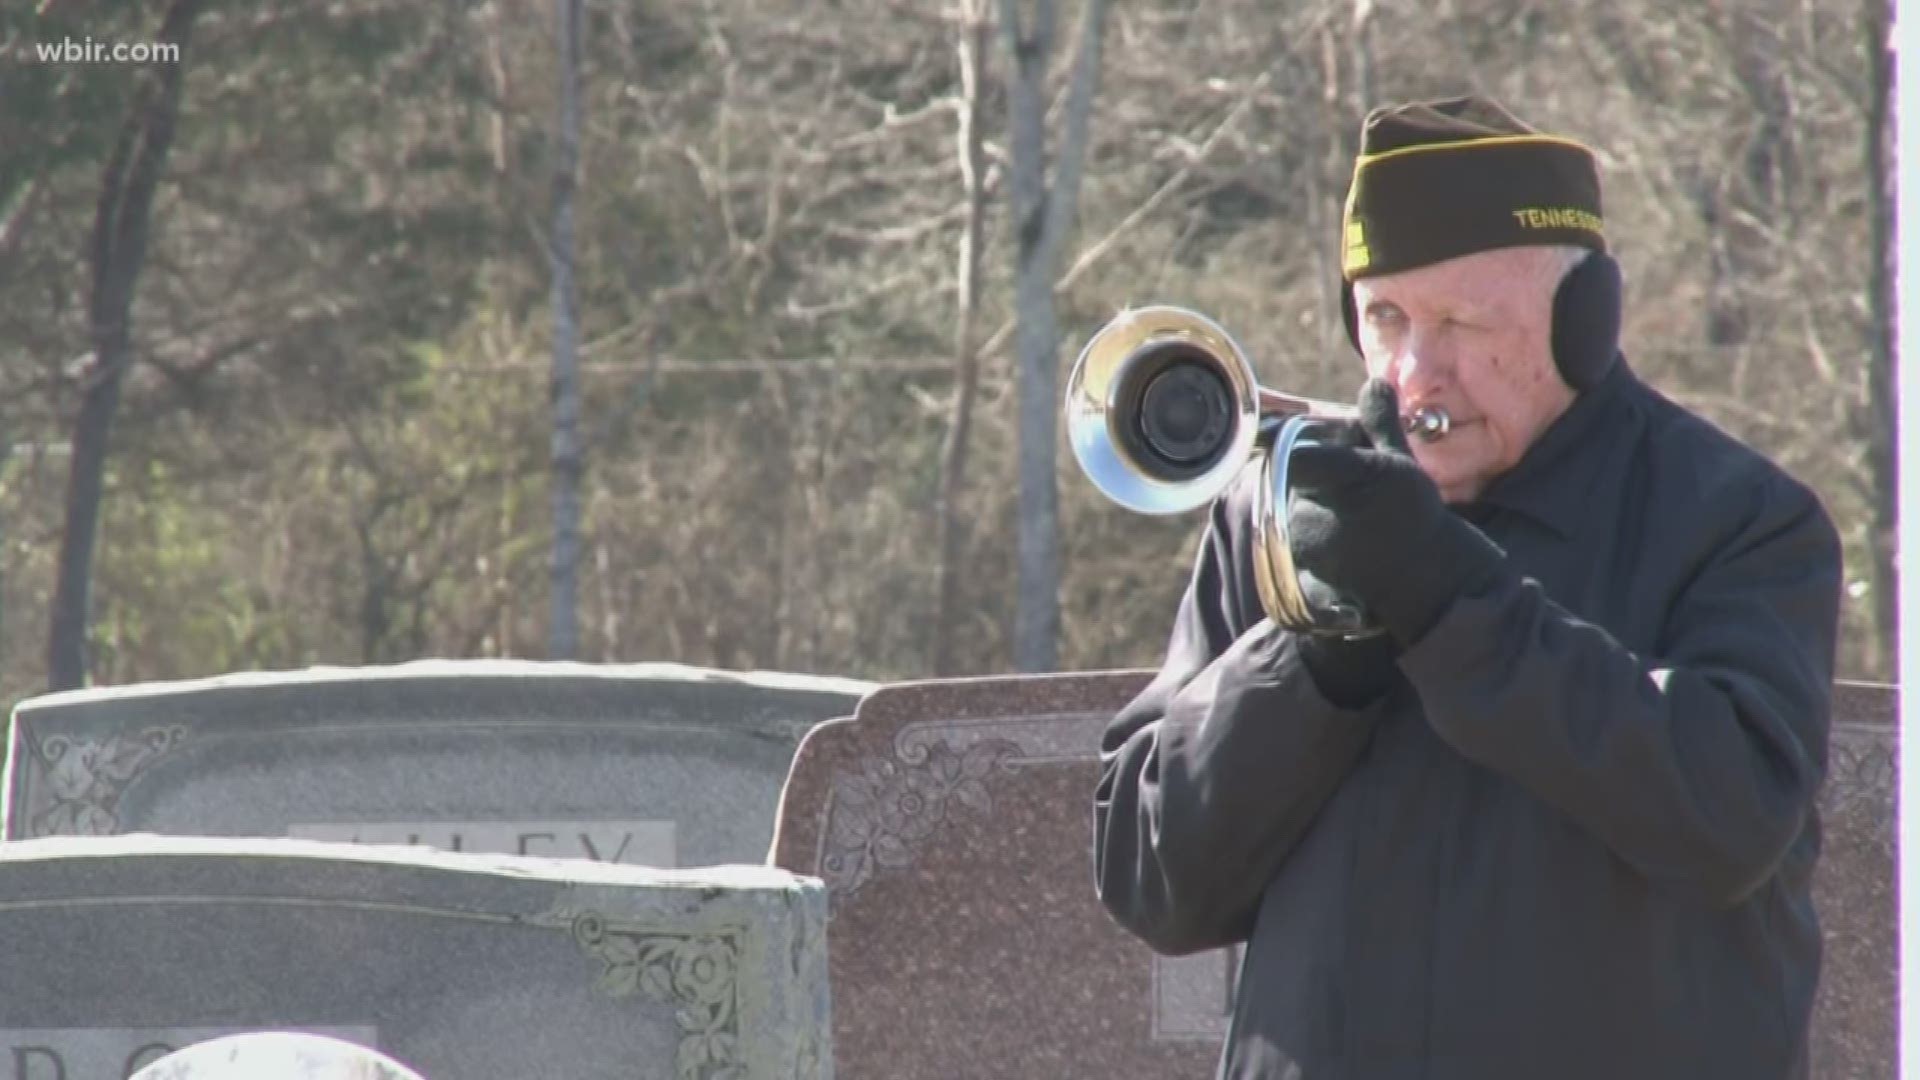 Over 100 strangers laid an unclaimed Air Force veteran to rest in her hometown of Dandrige, Tennessse.